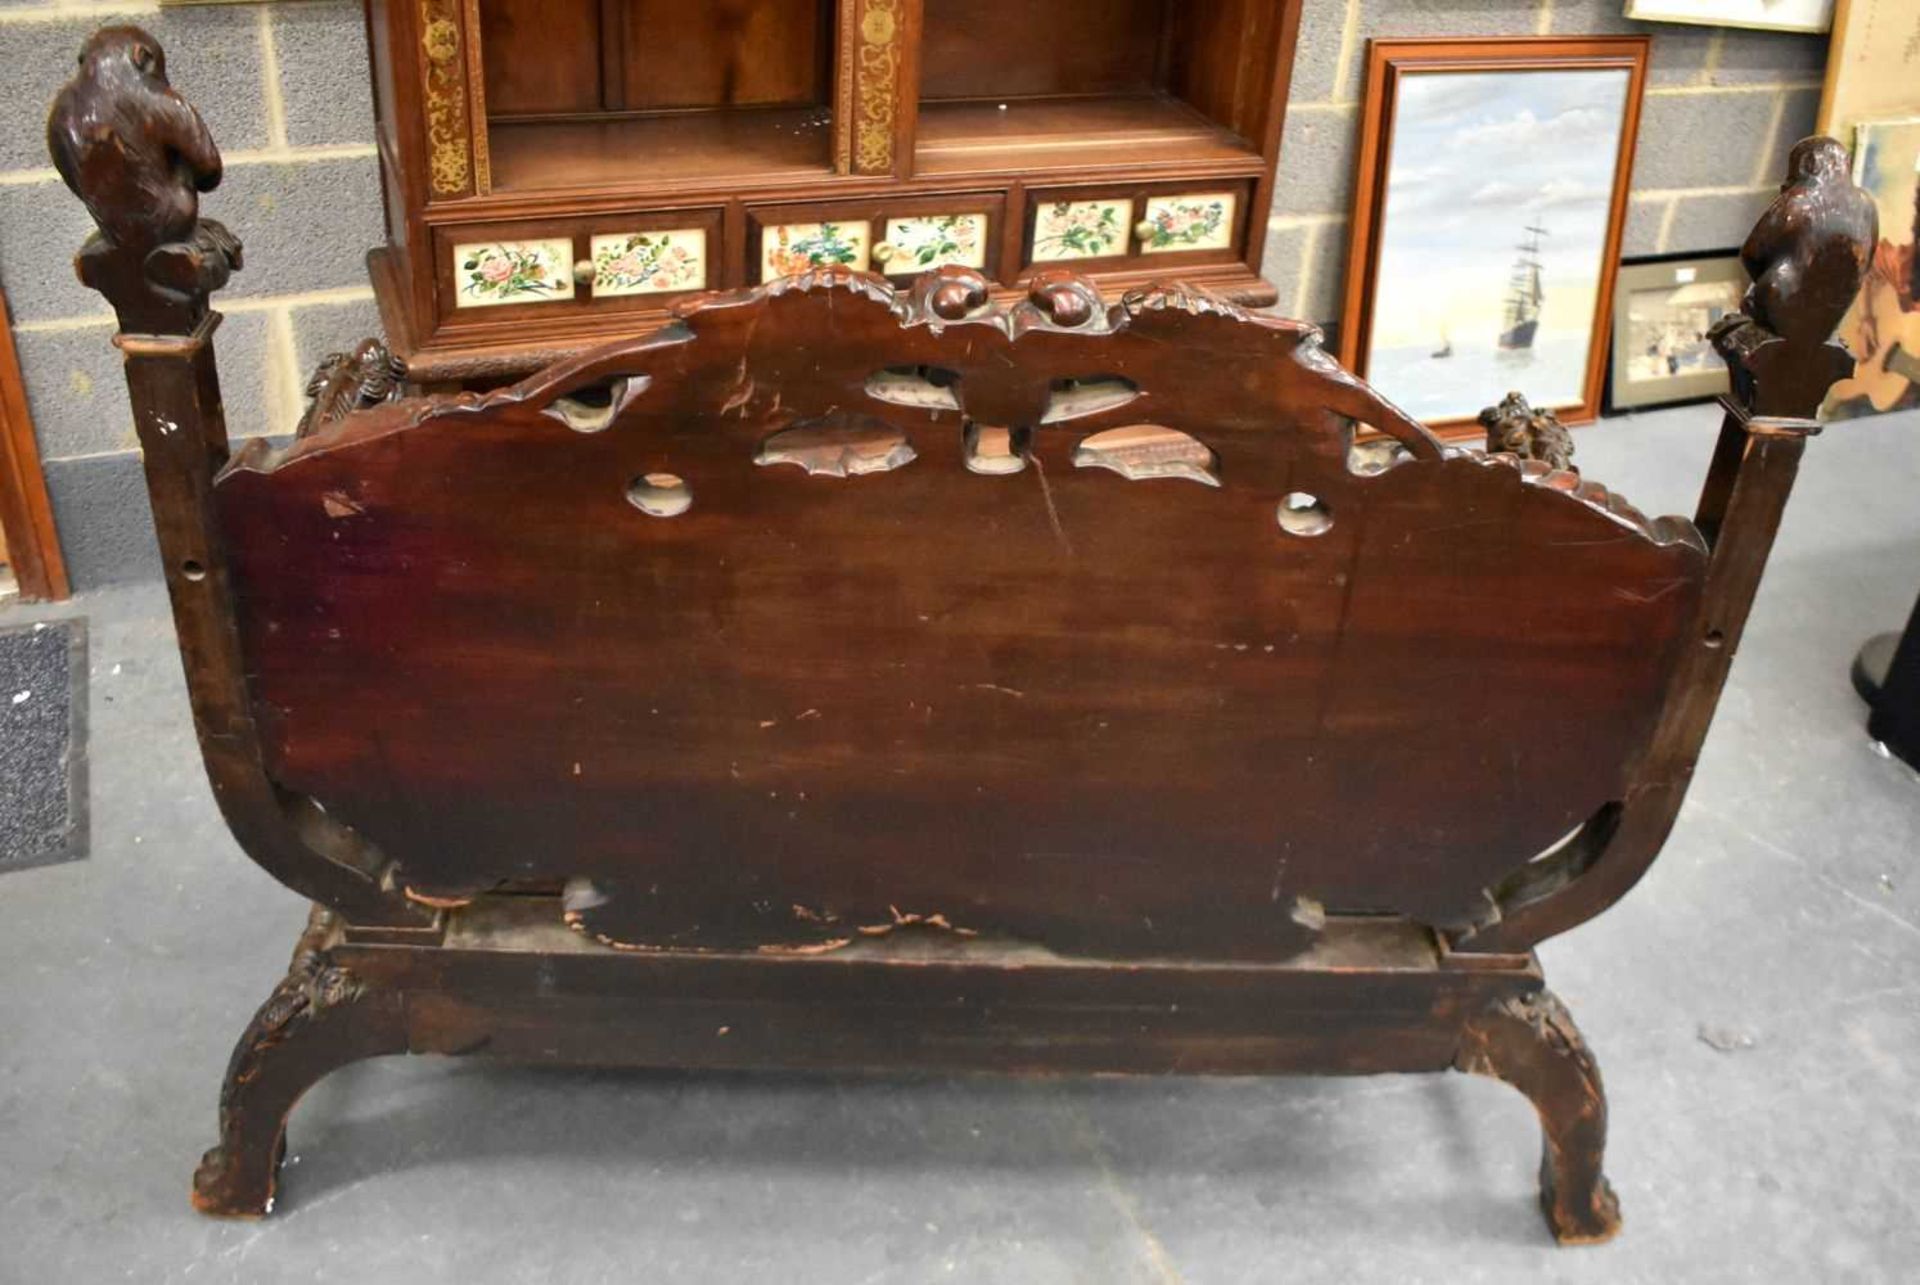 A LARGE 19TH CENTURY JAPANESE MEIJI PERIOD CARVED WOOD DRAGON BENCH. 125 cm x 125 cm. - Image 10 of 14